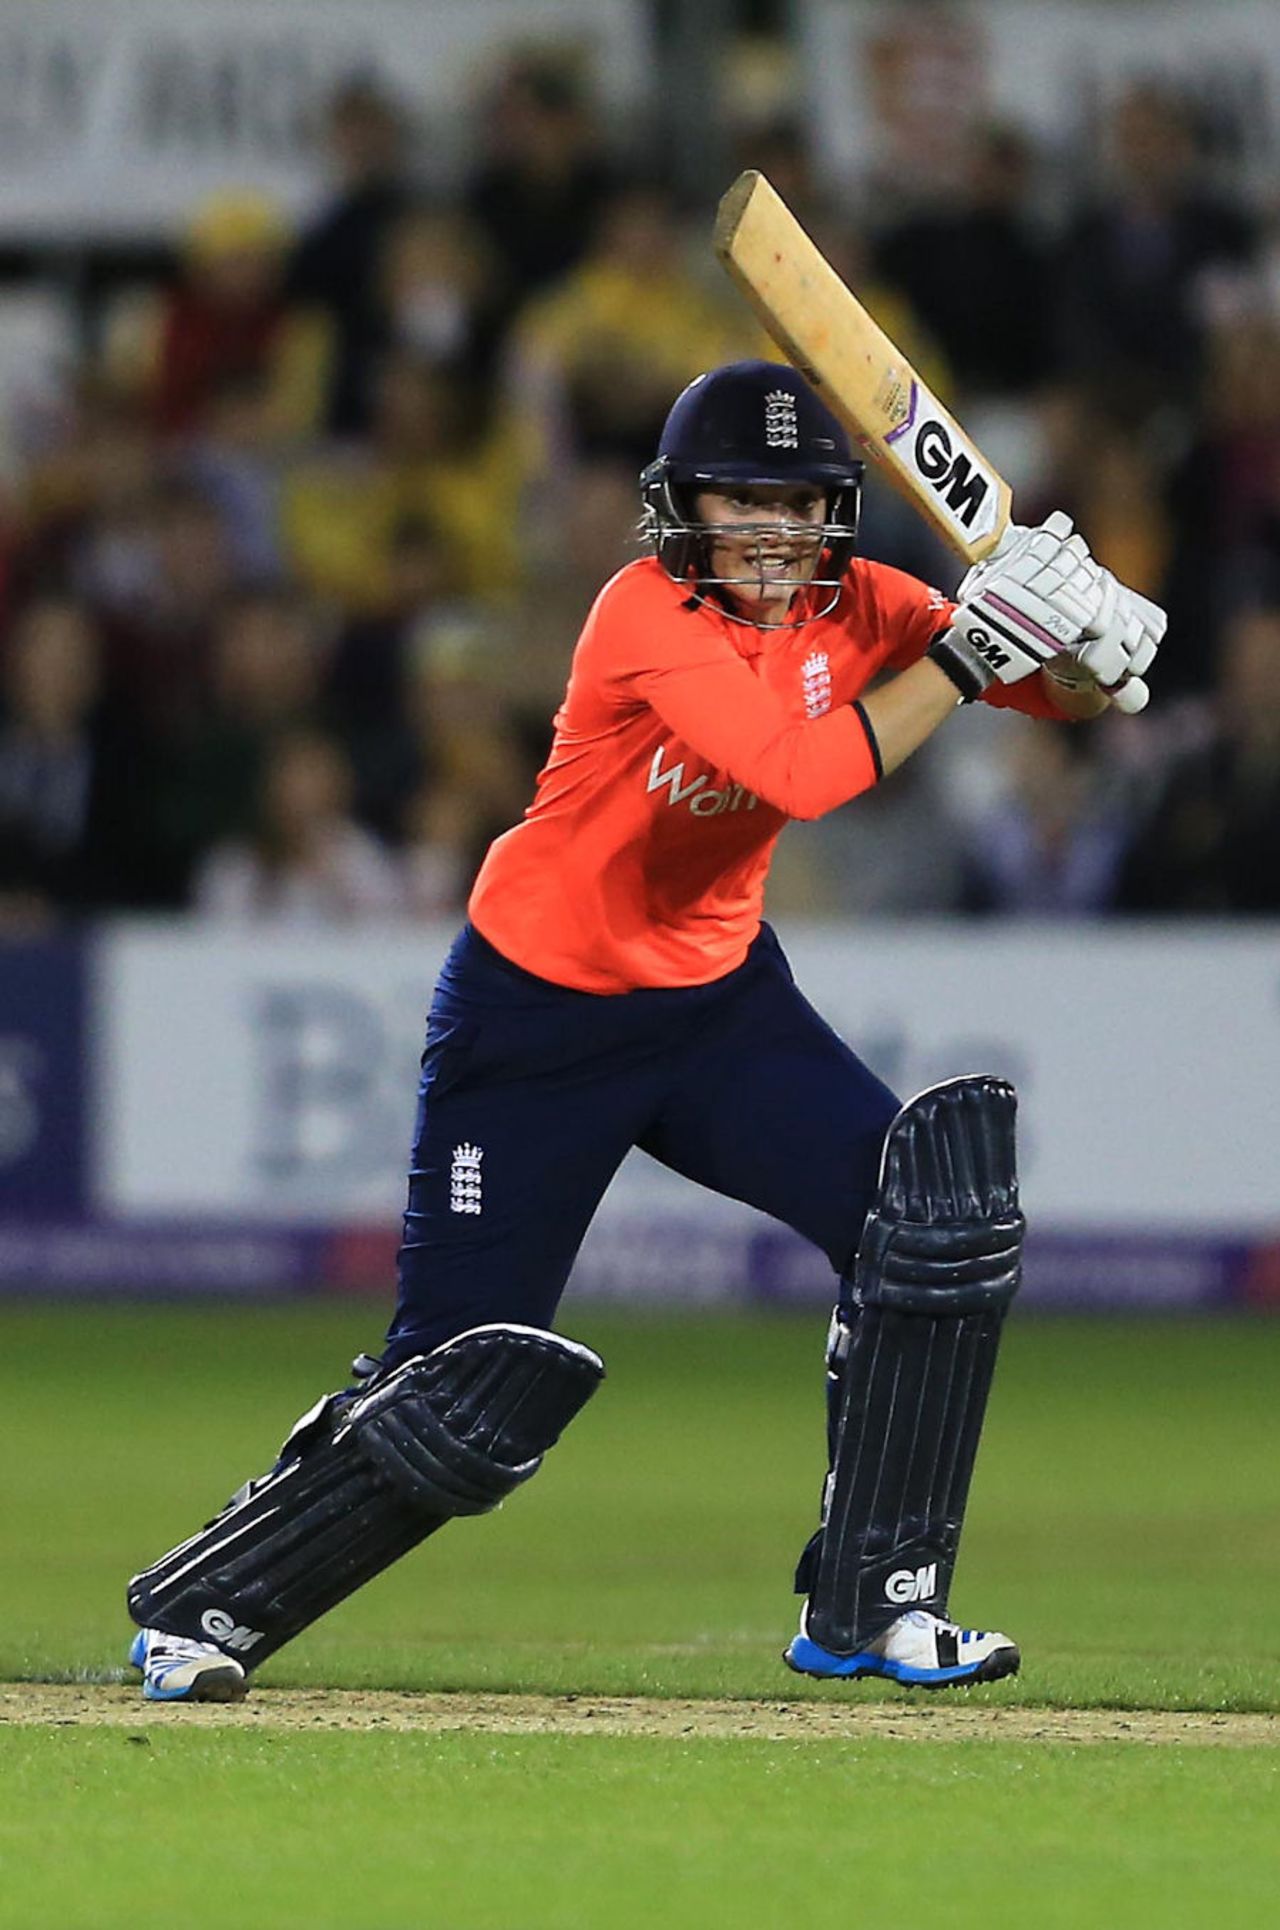 Sarah Taylor struck a matchwinning fifty to keep England alive in the Ashes, England Women v Australia Women, 1st T20, Chelmsford, August 27, 2015